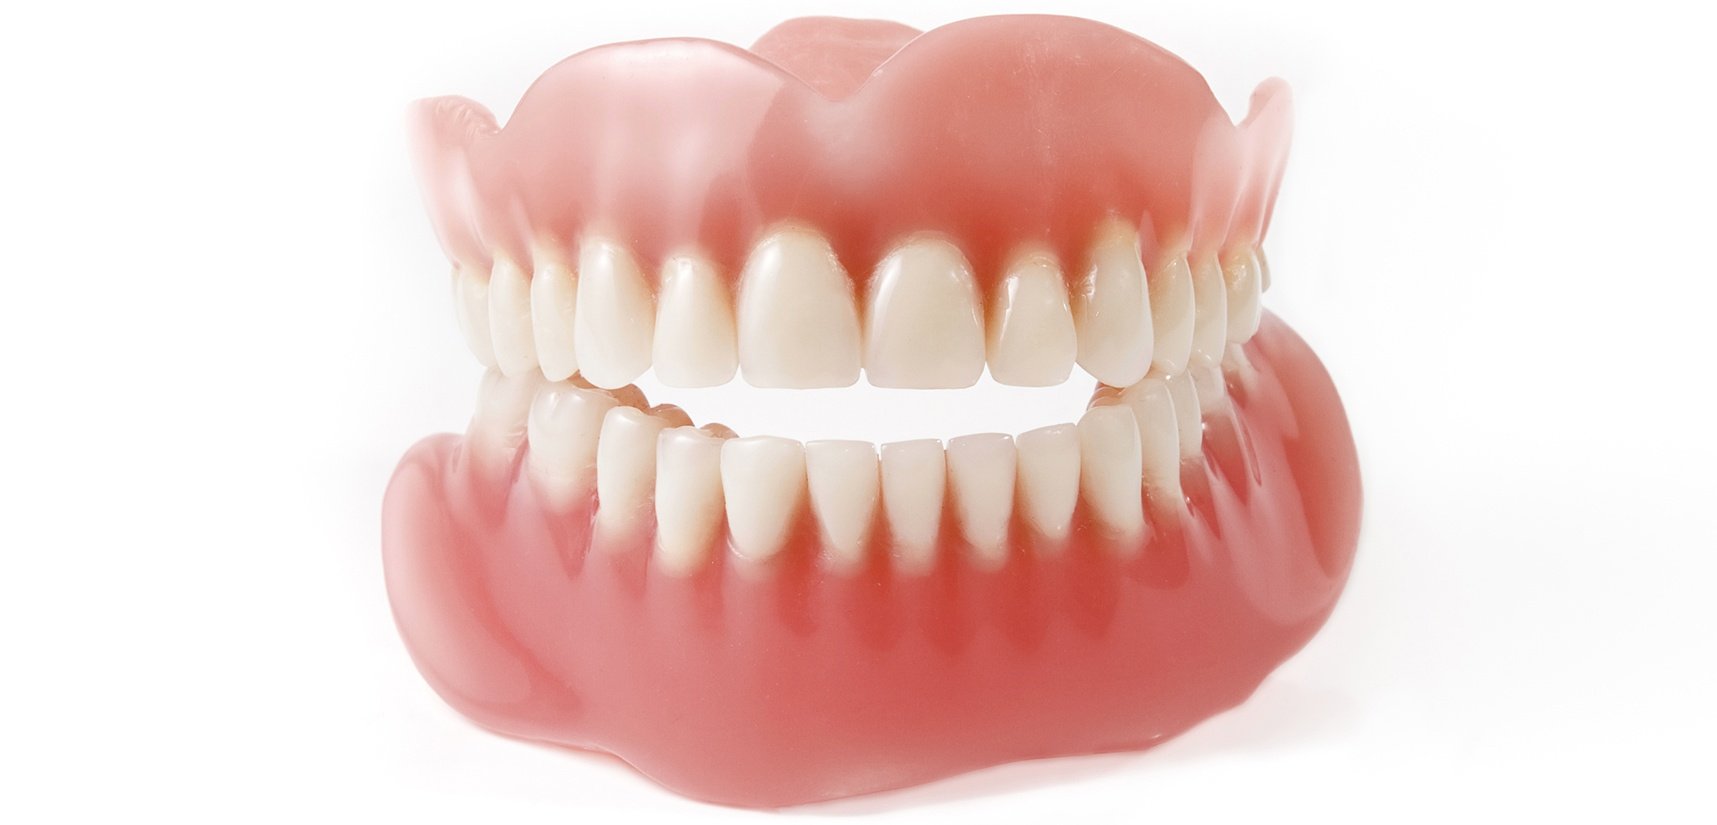 TIPS FOR A SUCCESSFUL DENTURE TEETH TRY IN